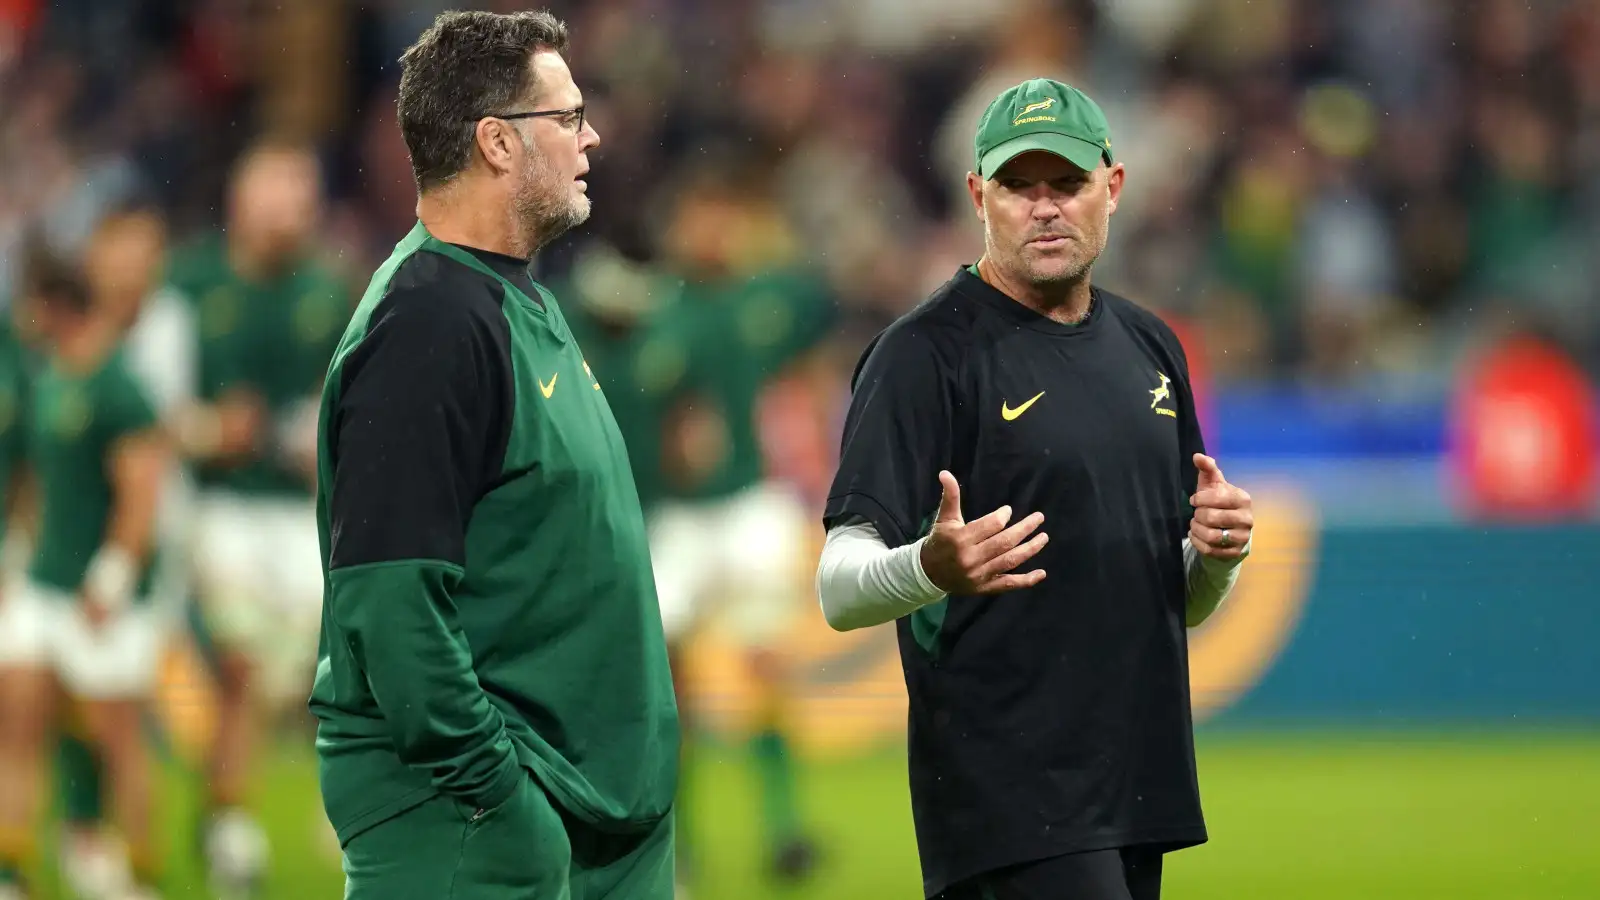 Springboks brains trust Jacques Nienaber and Rassie Erasmus ahead of the Rugby World Cup semi-final.